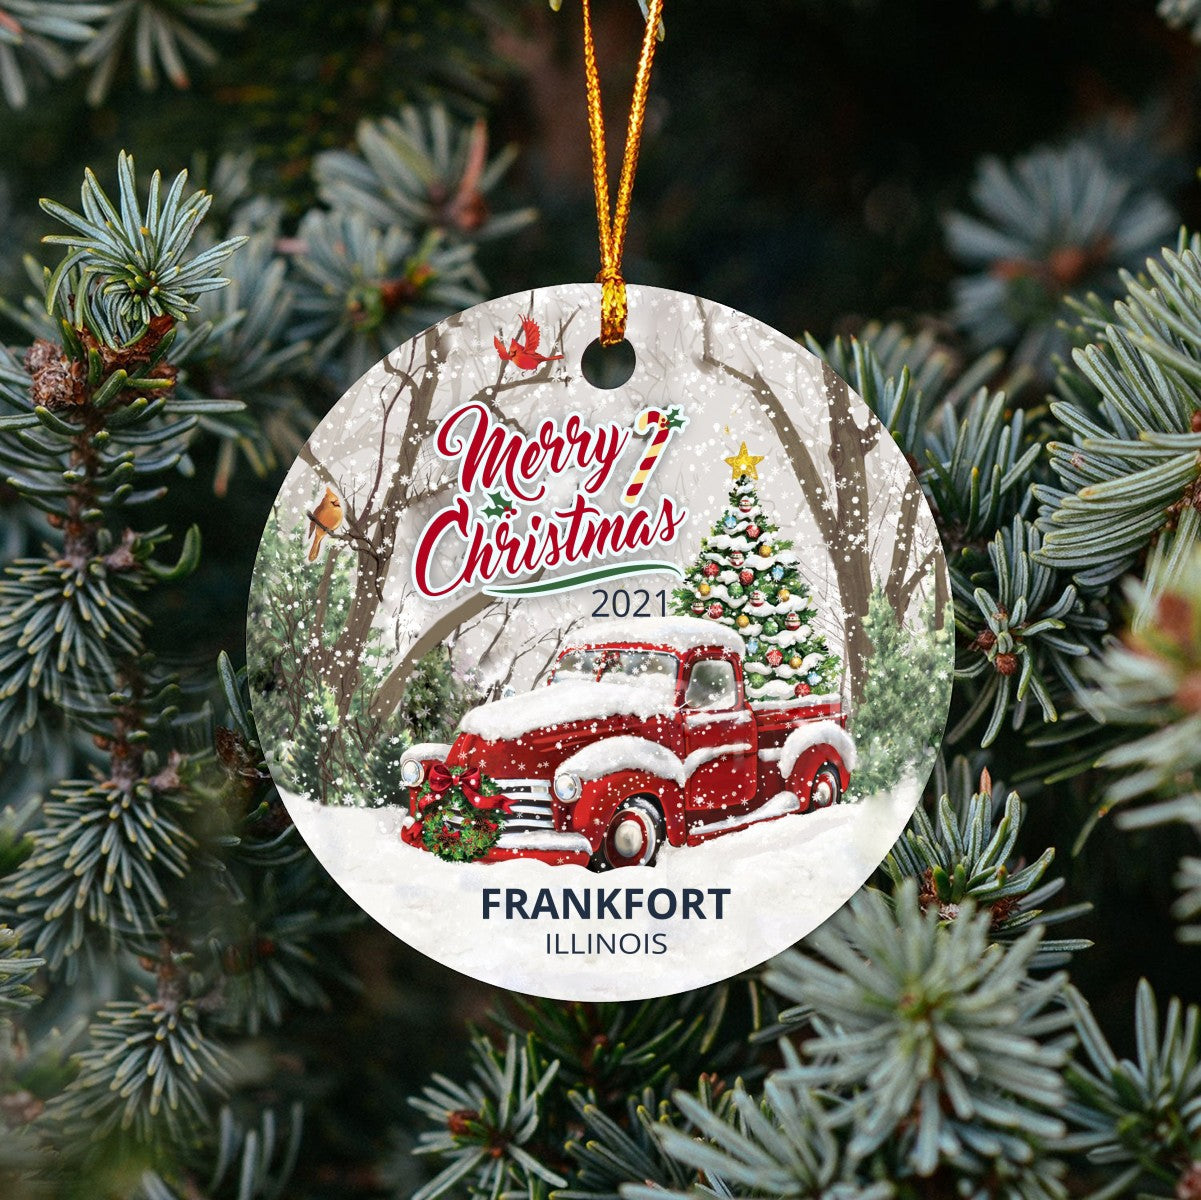 Christmas Tree Ornaments Frankfort - Ornament Customize With Name City And State Frankfort Illinois IL - Red Truck Xmas Ornaments 3'' Plastic Gift For Family, Friend And Housewarming